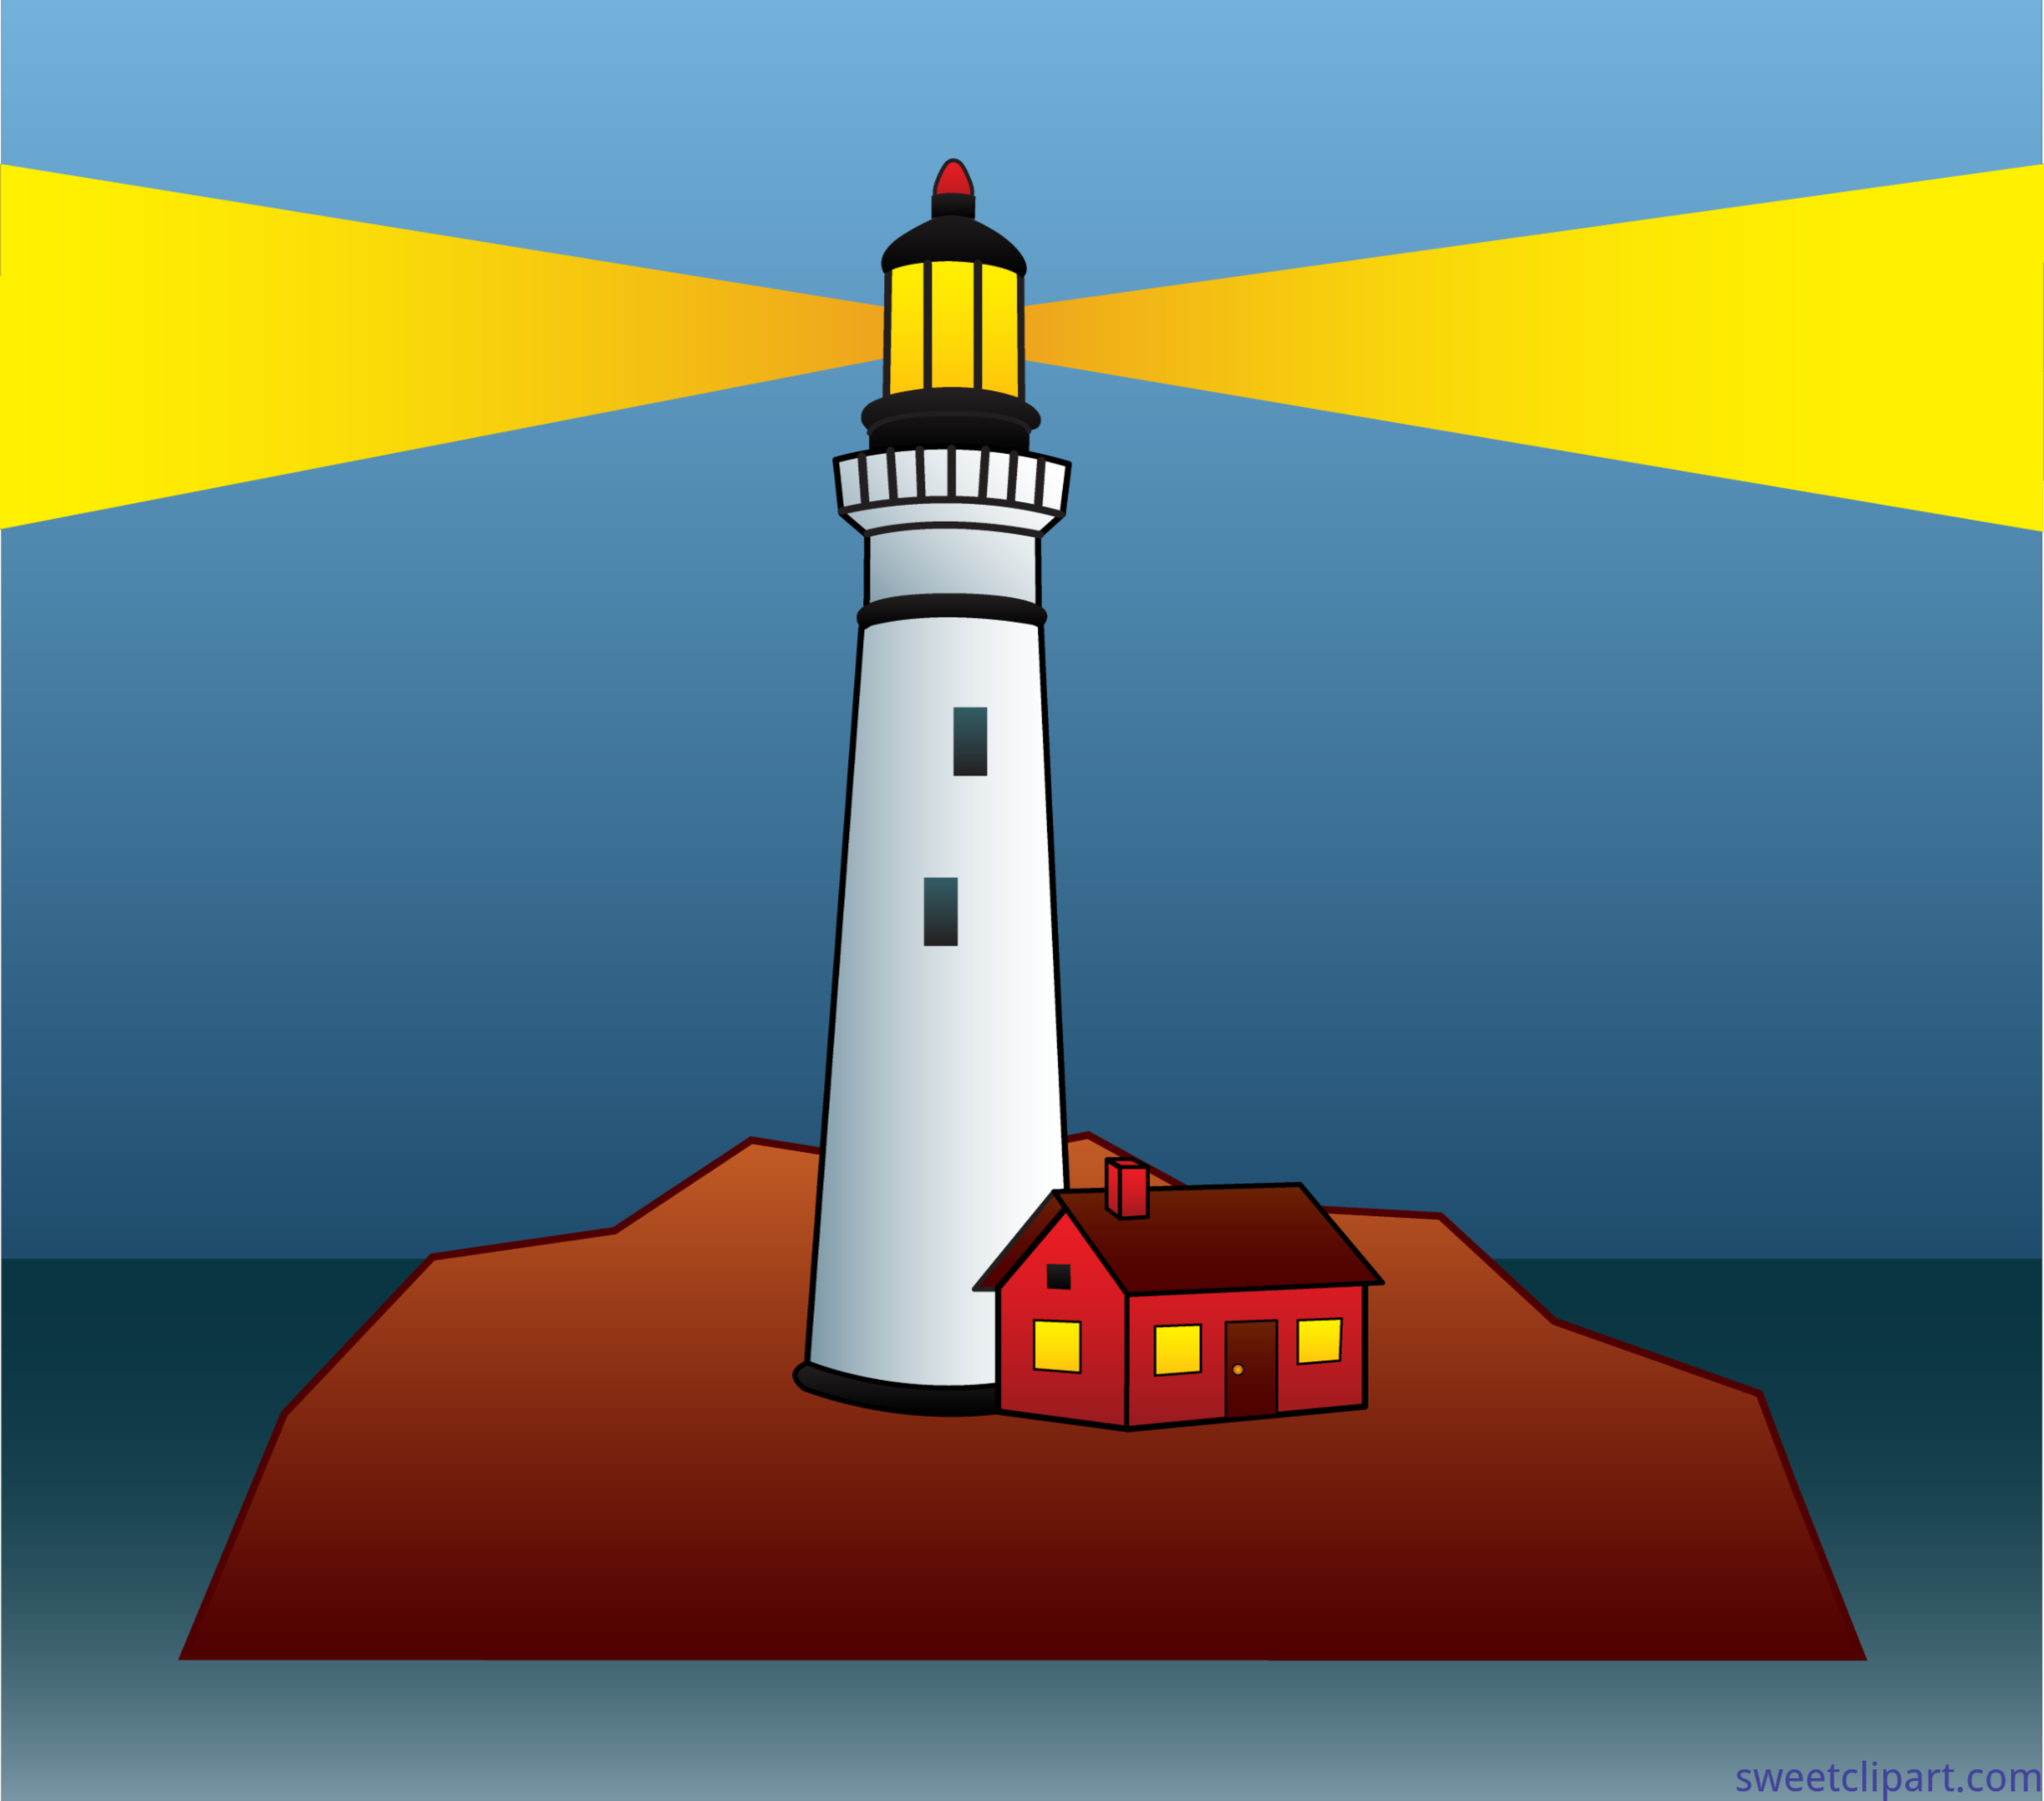 Lighthouse clipart lighthouse scene Lighthouse lighthouse scene Transparent FREE for download